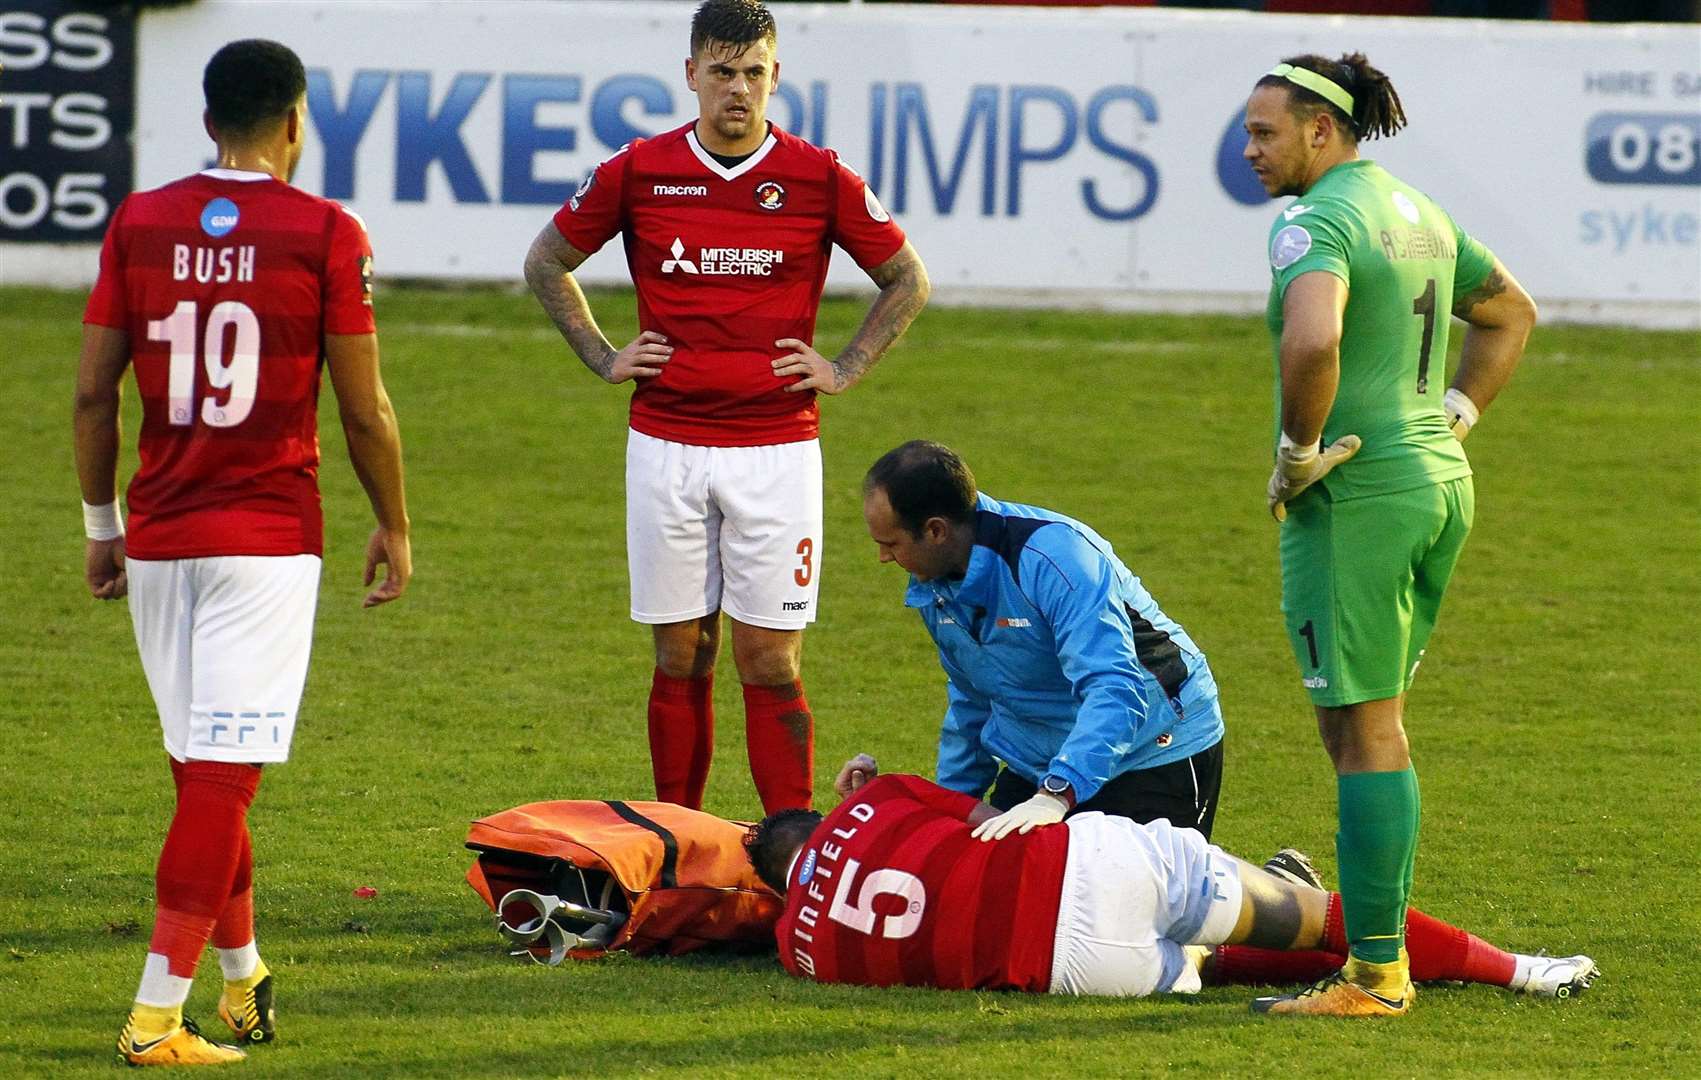 Dave Winfield: Ebbsfleet United captain facing a scan on injured knee